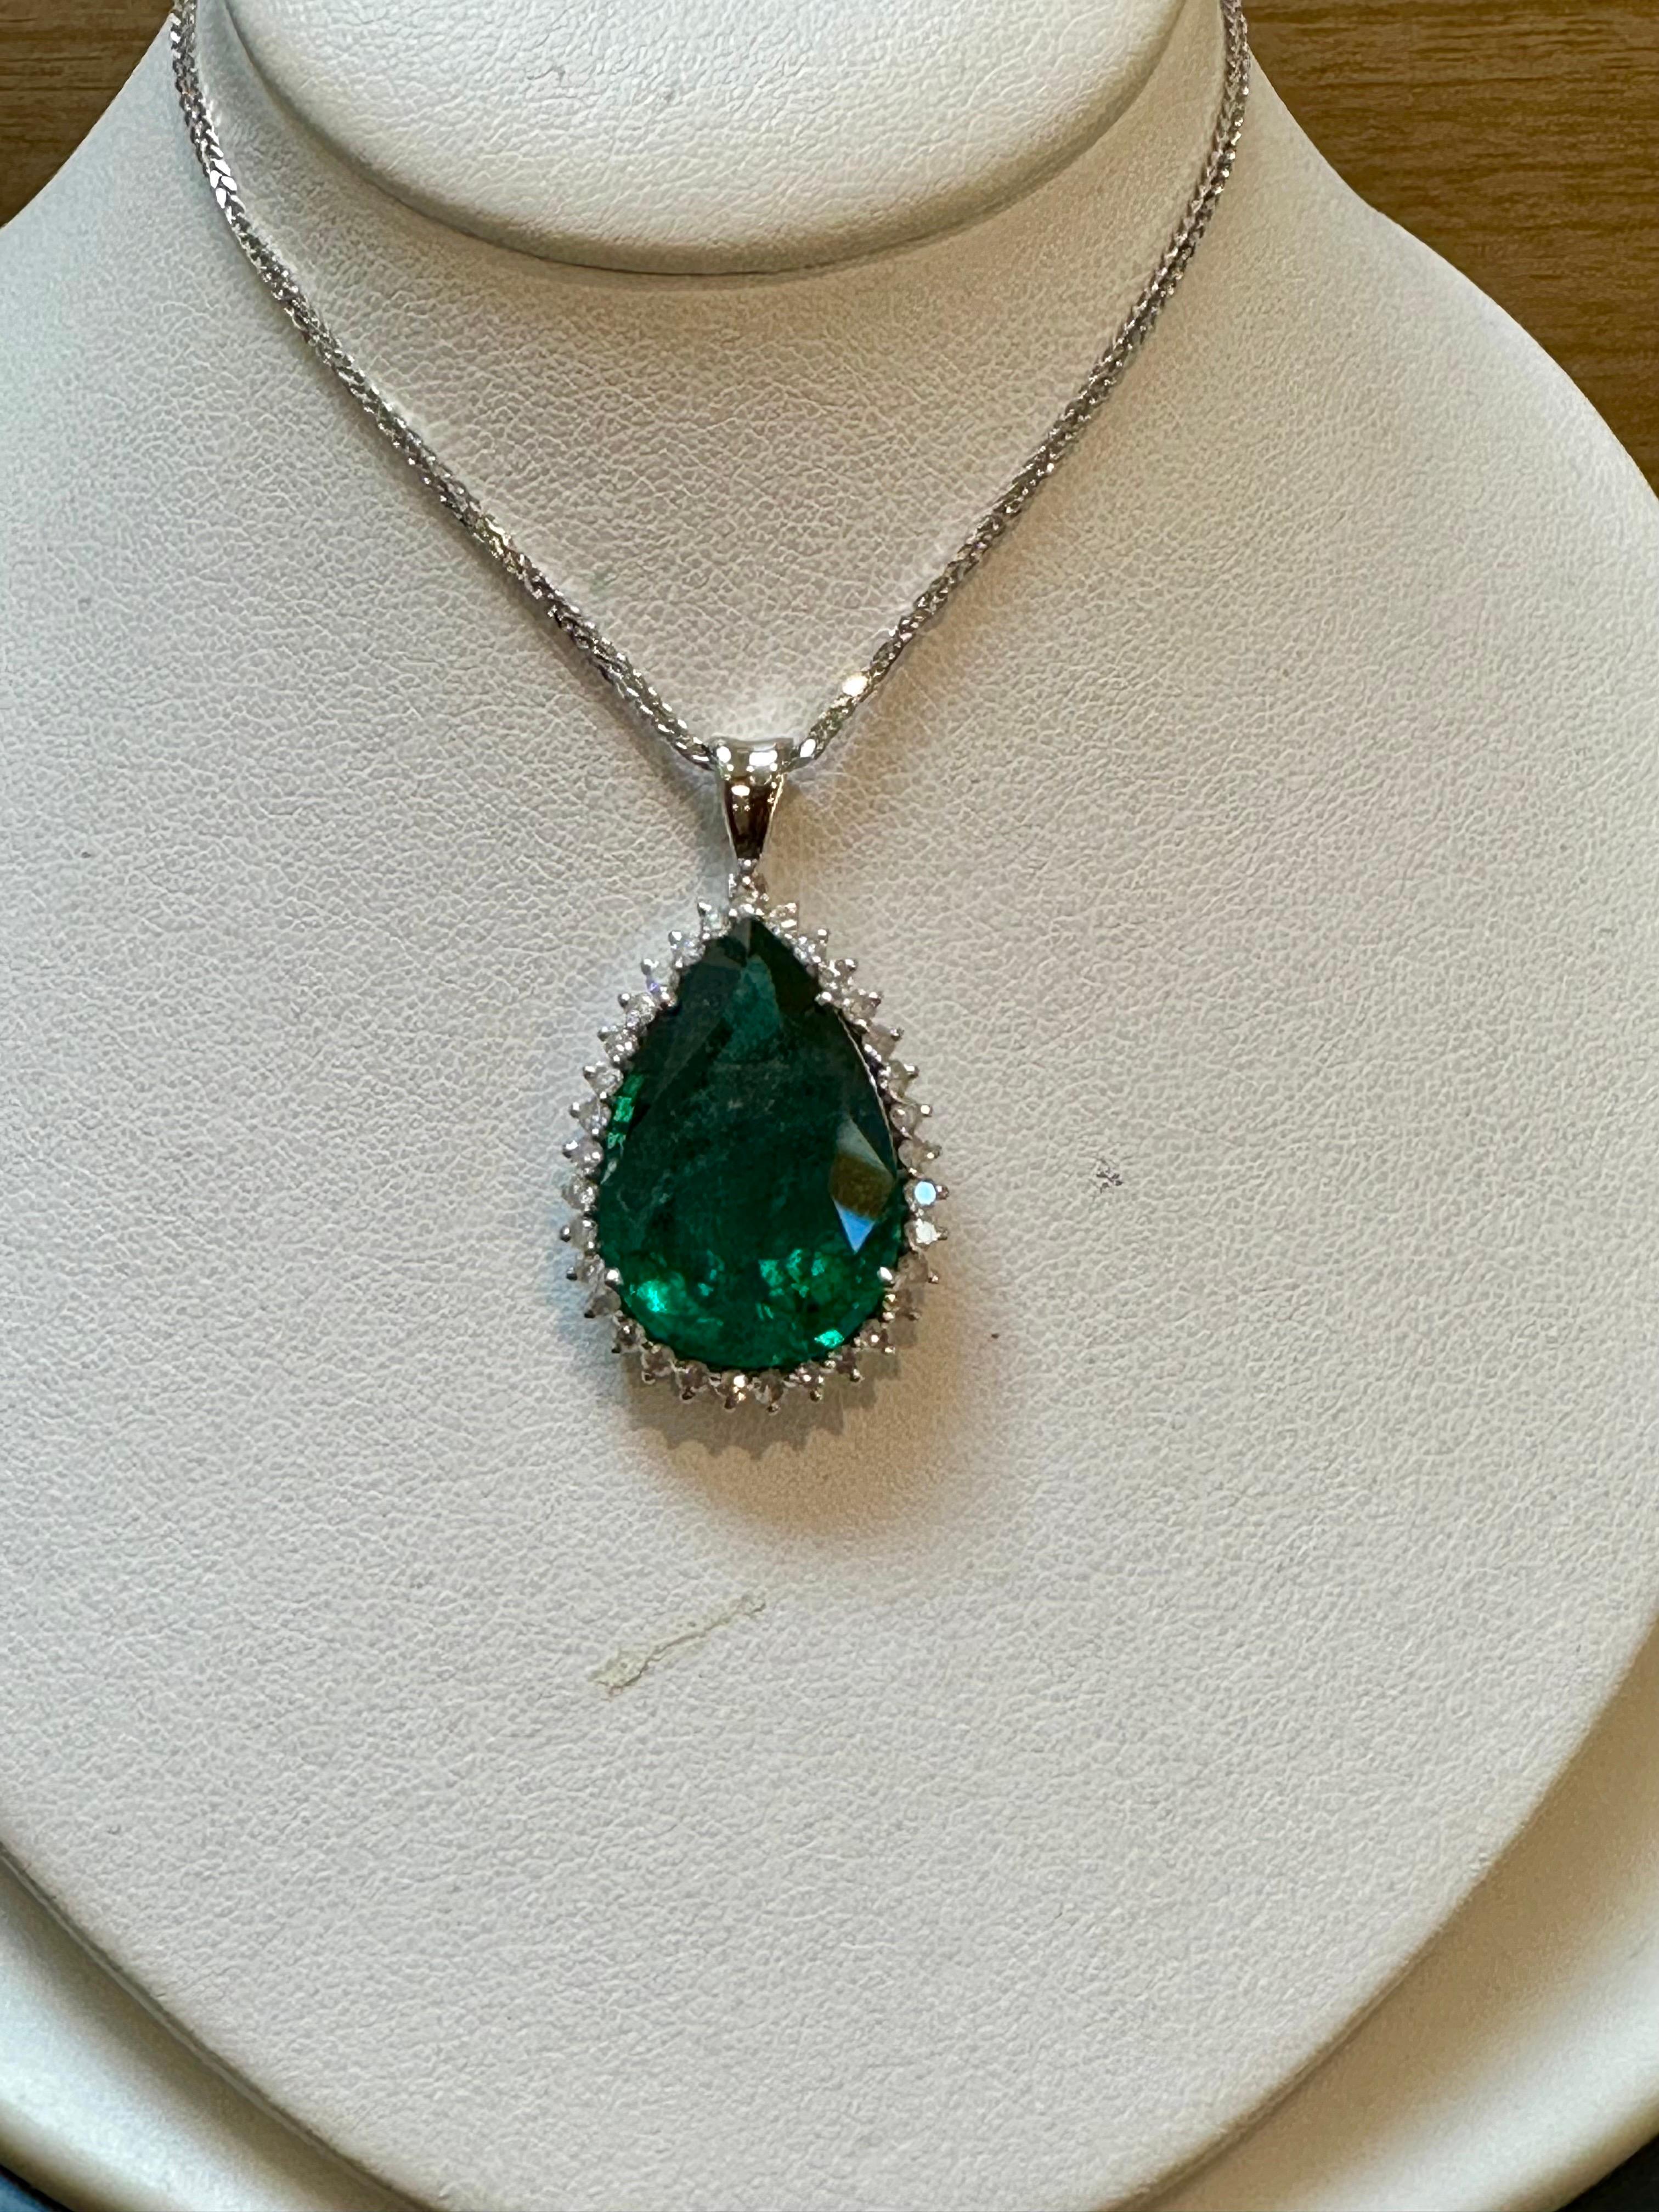 13 Ct Pear Cut Emerald & 1 Ct Diamond Halo Pendent/Necklace 14 KW Gold Chain 1